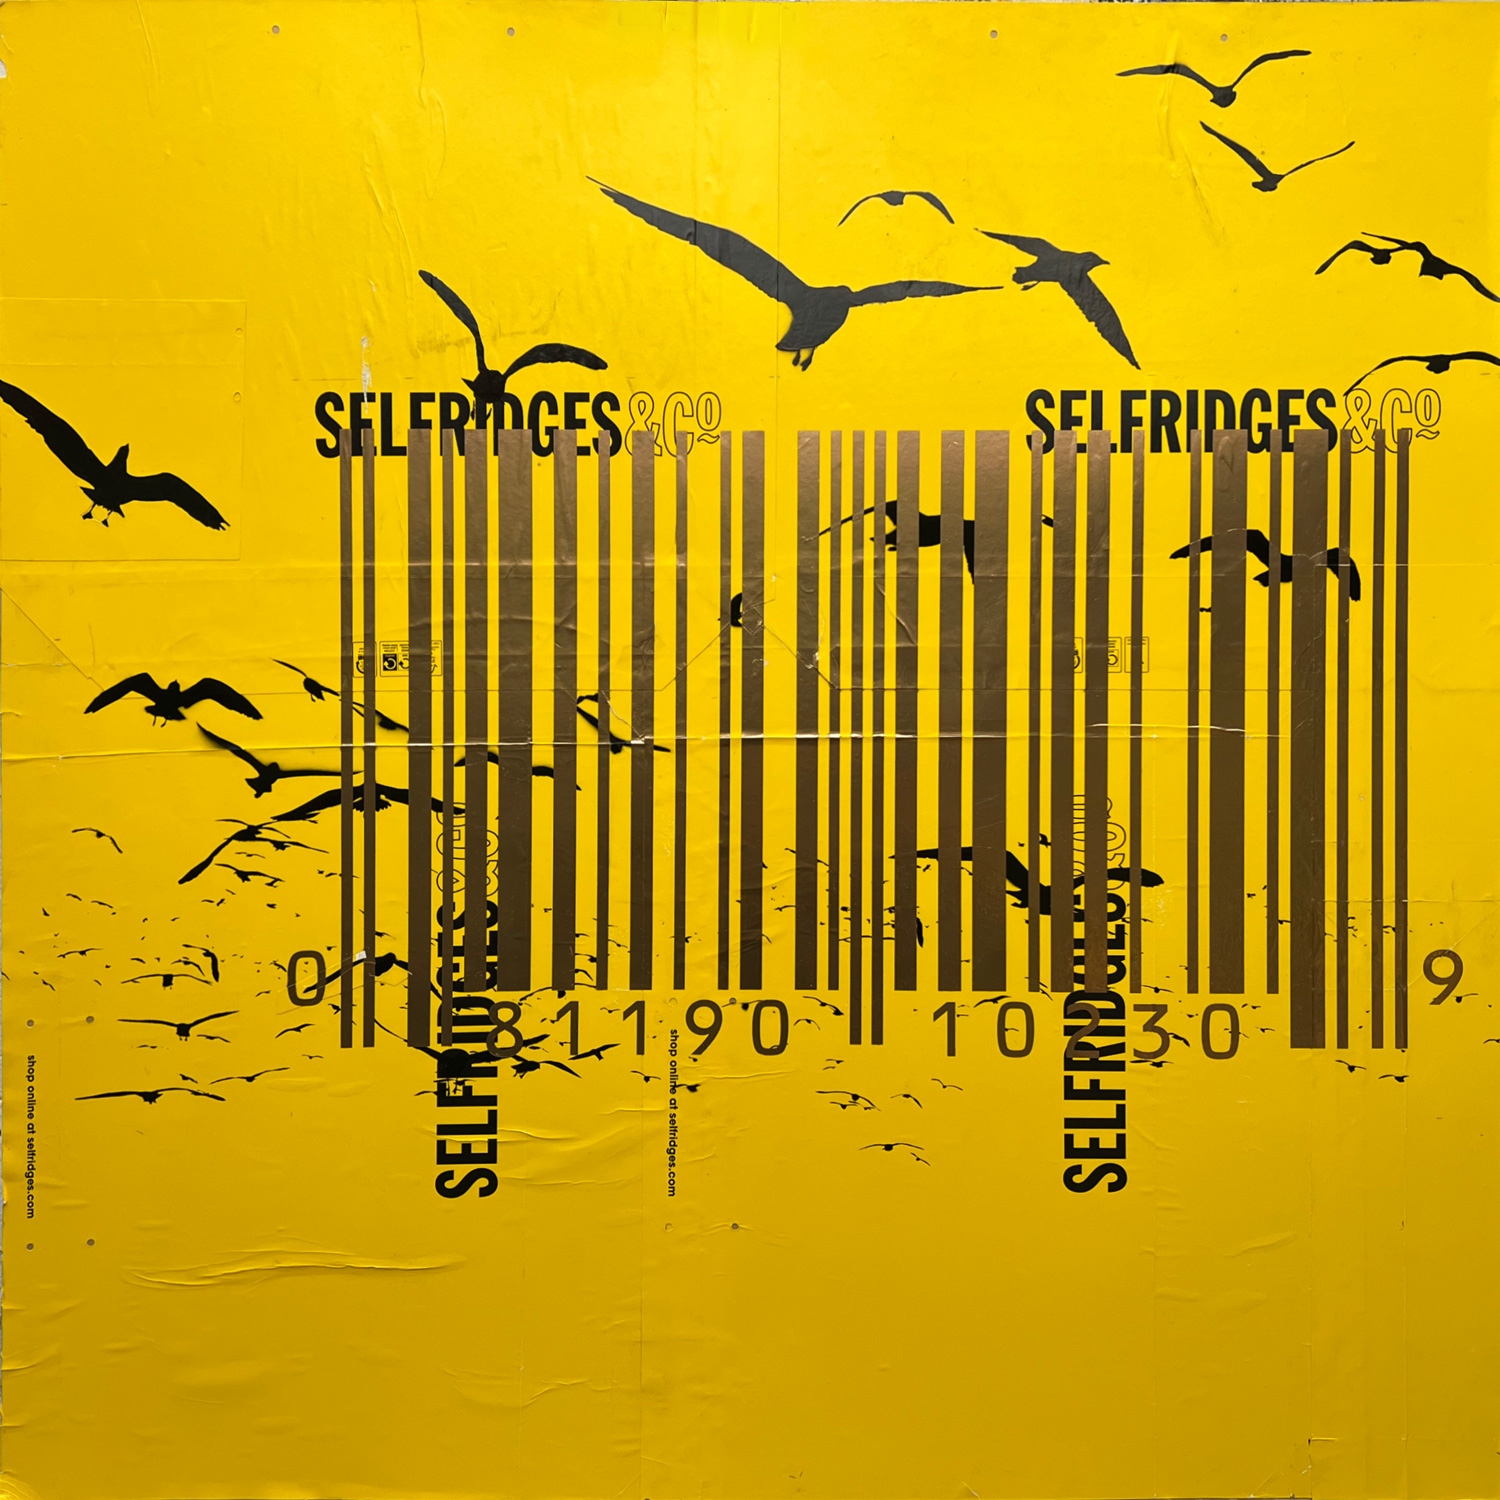 Mixed media painting featuring seagulls and a barcode.